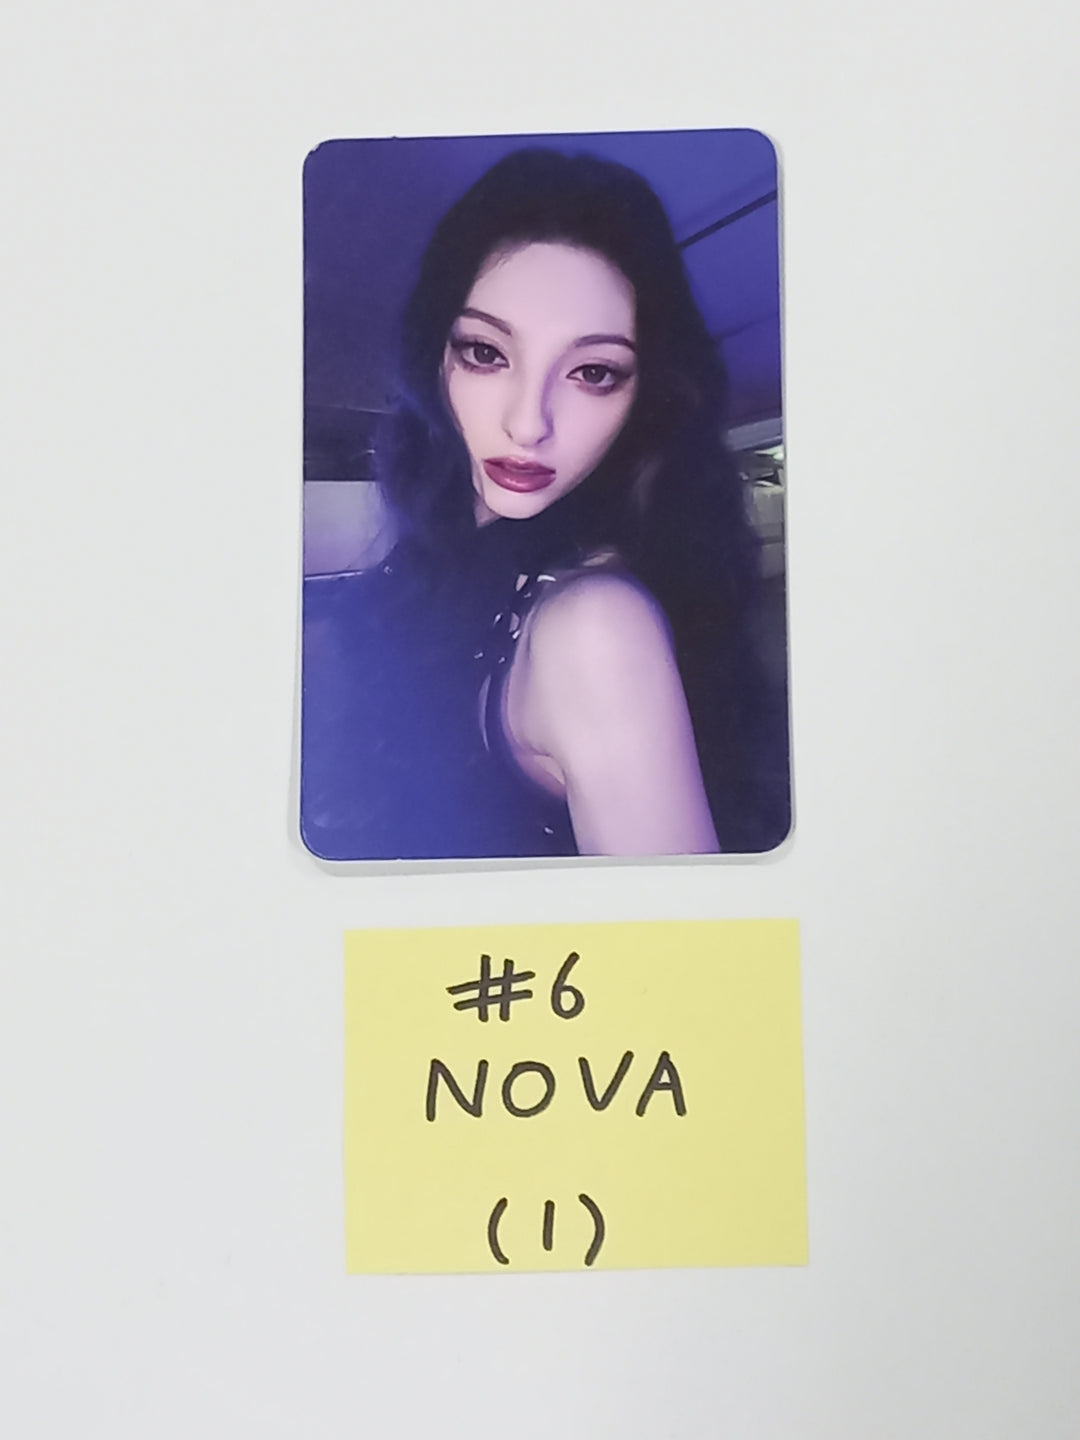 X:IN "THE REAL" - Official Photocard [24.03.08]